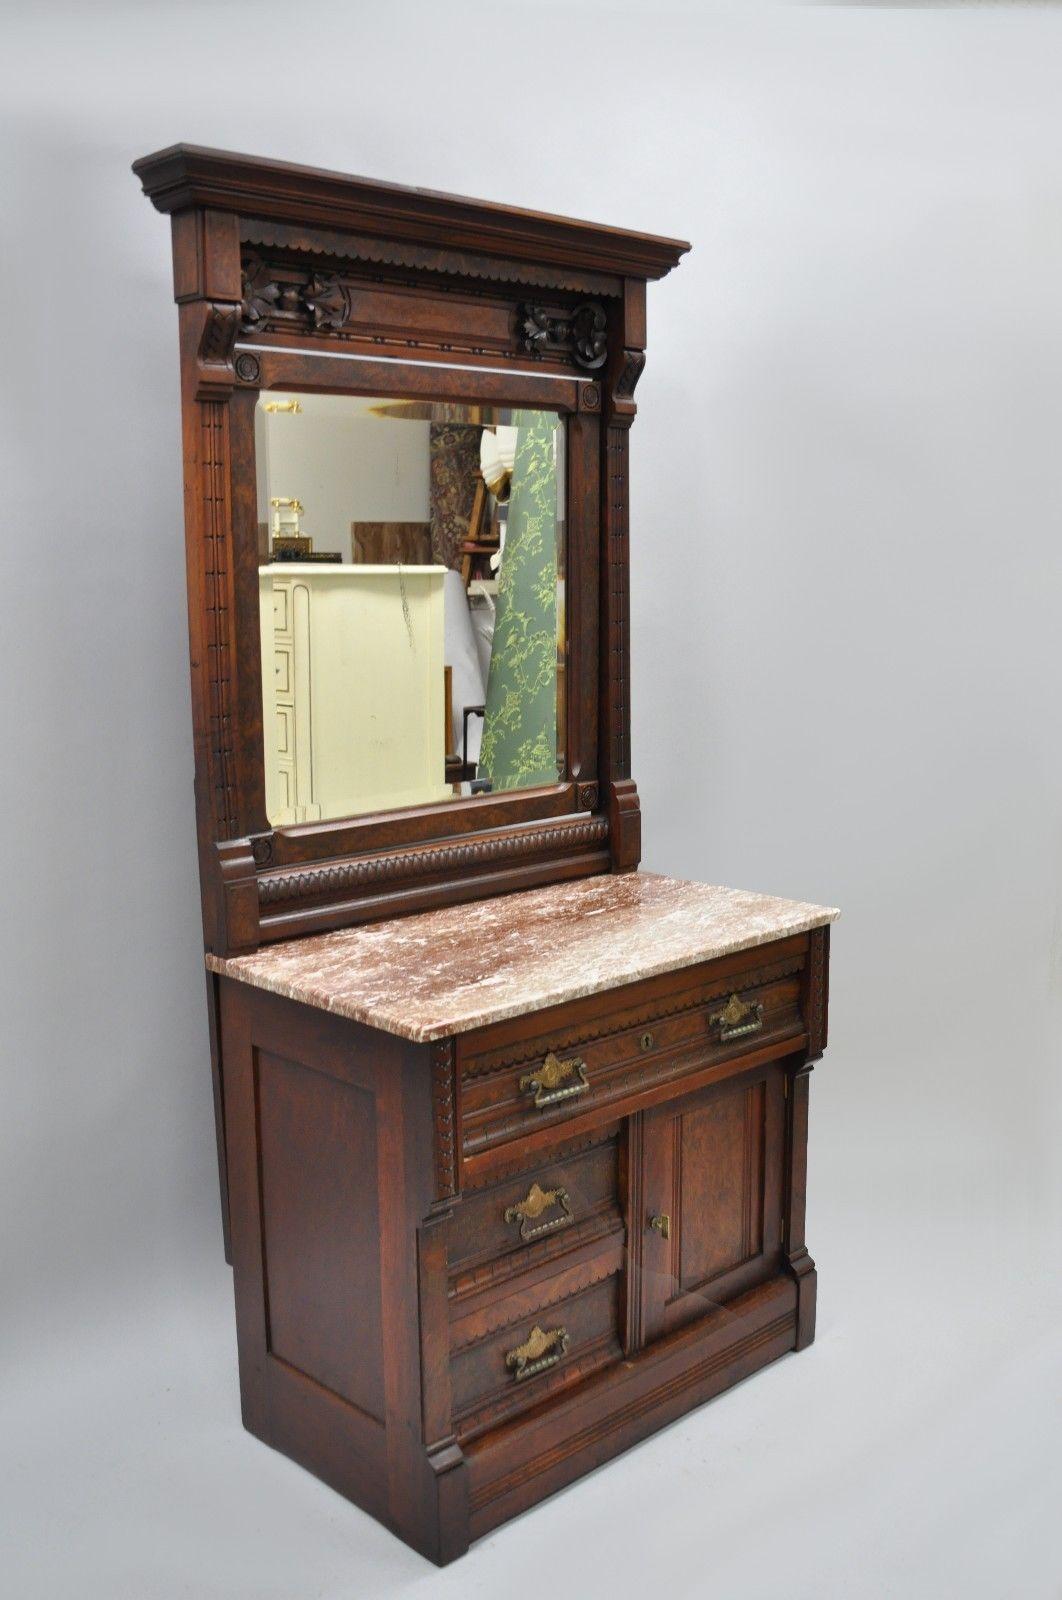 Antique Eastlake Victorian burl walnut marble-top wash stand chest with mirror. Item features beautiful wood grain, pivoting beveled glass mirror, marble top, three dovetailed drawers, and one swing door, circa mid-1800s. Measurements: 68